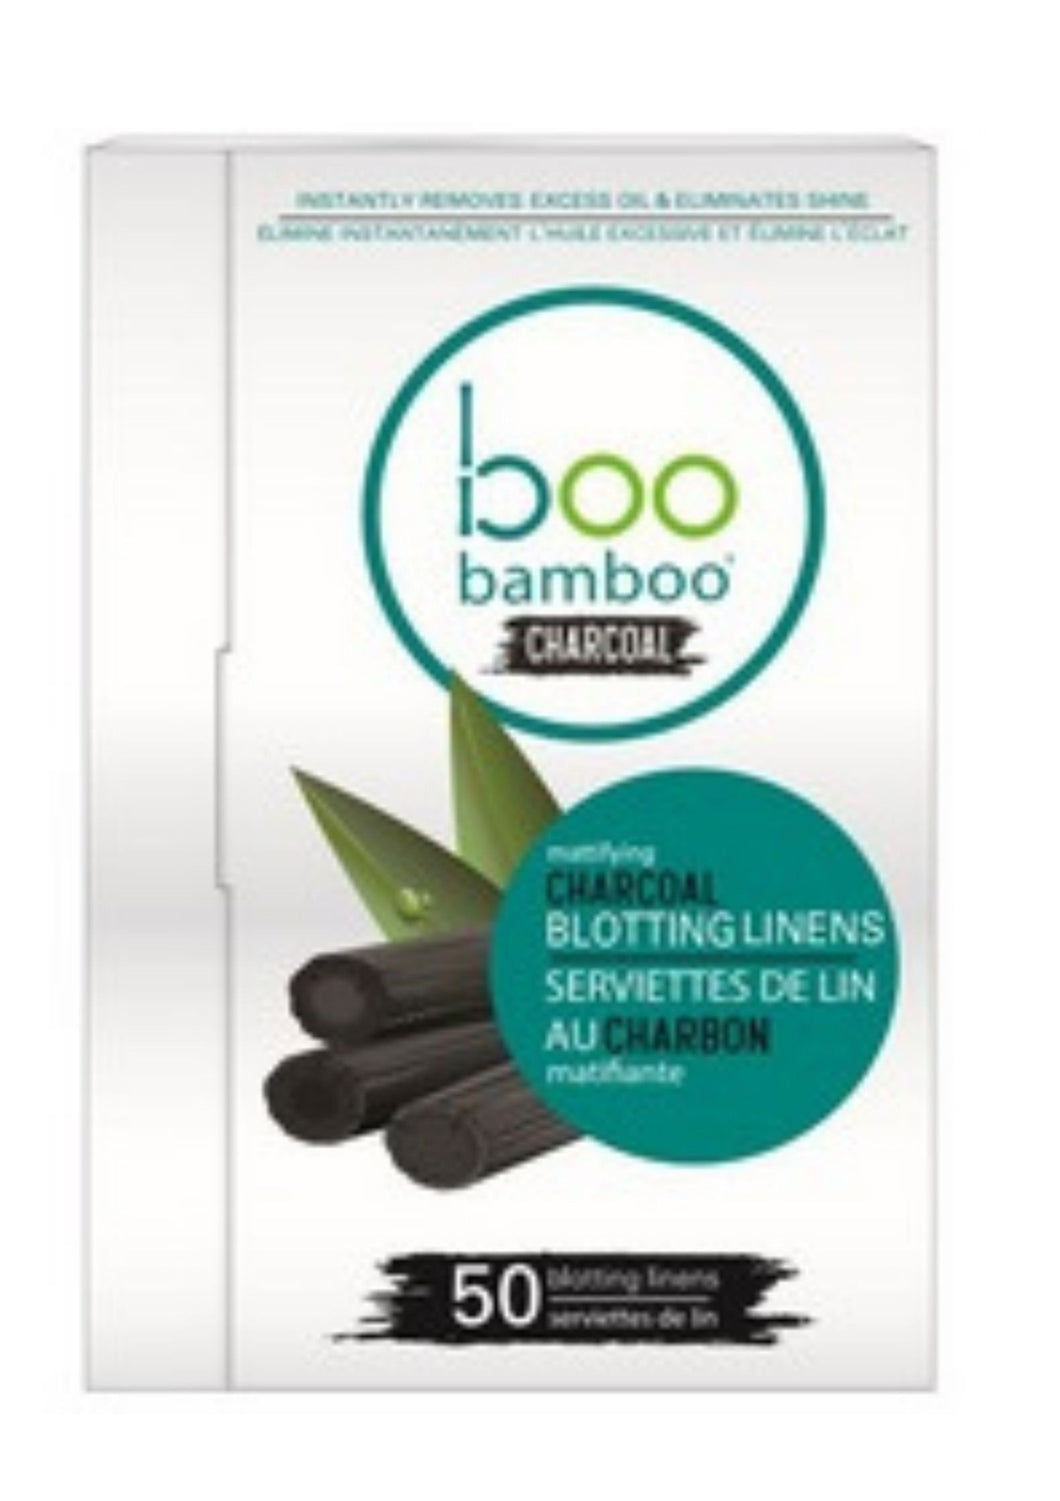 Mattifying Charcoal Blotting Linens are made with activated bamboo charcoal to draw impurities from your pores, boo bamboo's blotting linens will quickly and effectively absorb excess oil from your skin to eliminate shine and leave you skin looking fresh and mattified. (50/pack) $8.00